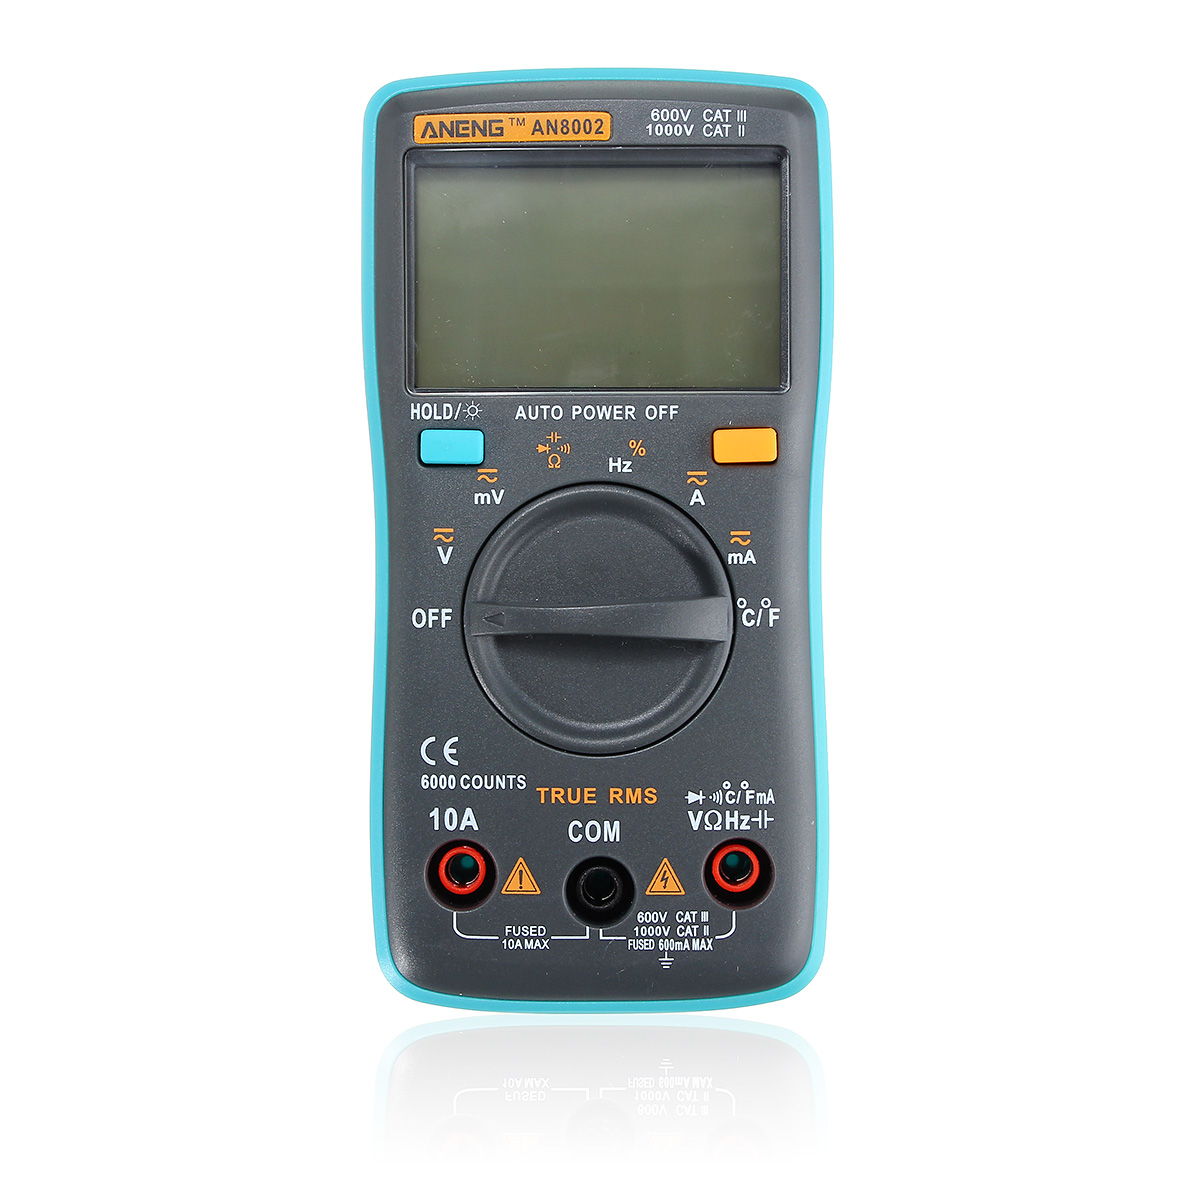 ANENG AN8002 Digital True RMS 6000 Counts Multimeter AC/DC Current Voltage Frequency Resistance Temperature Tester ℃/℉ 12